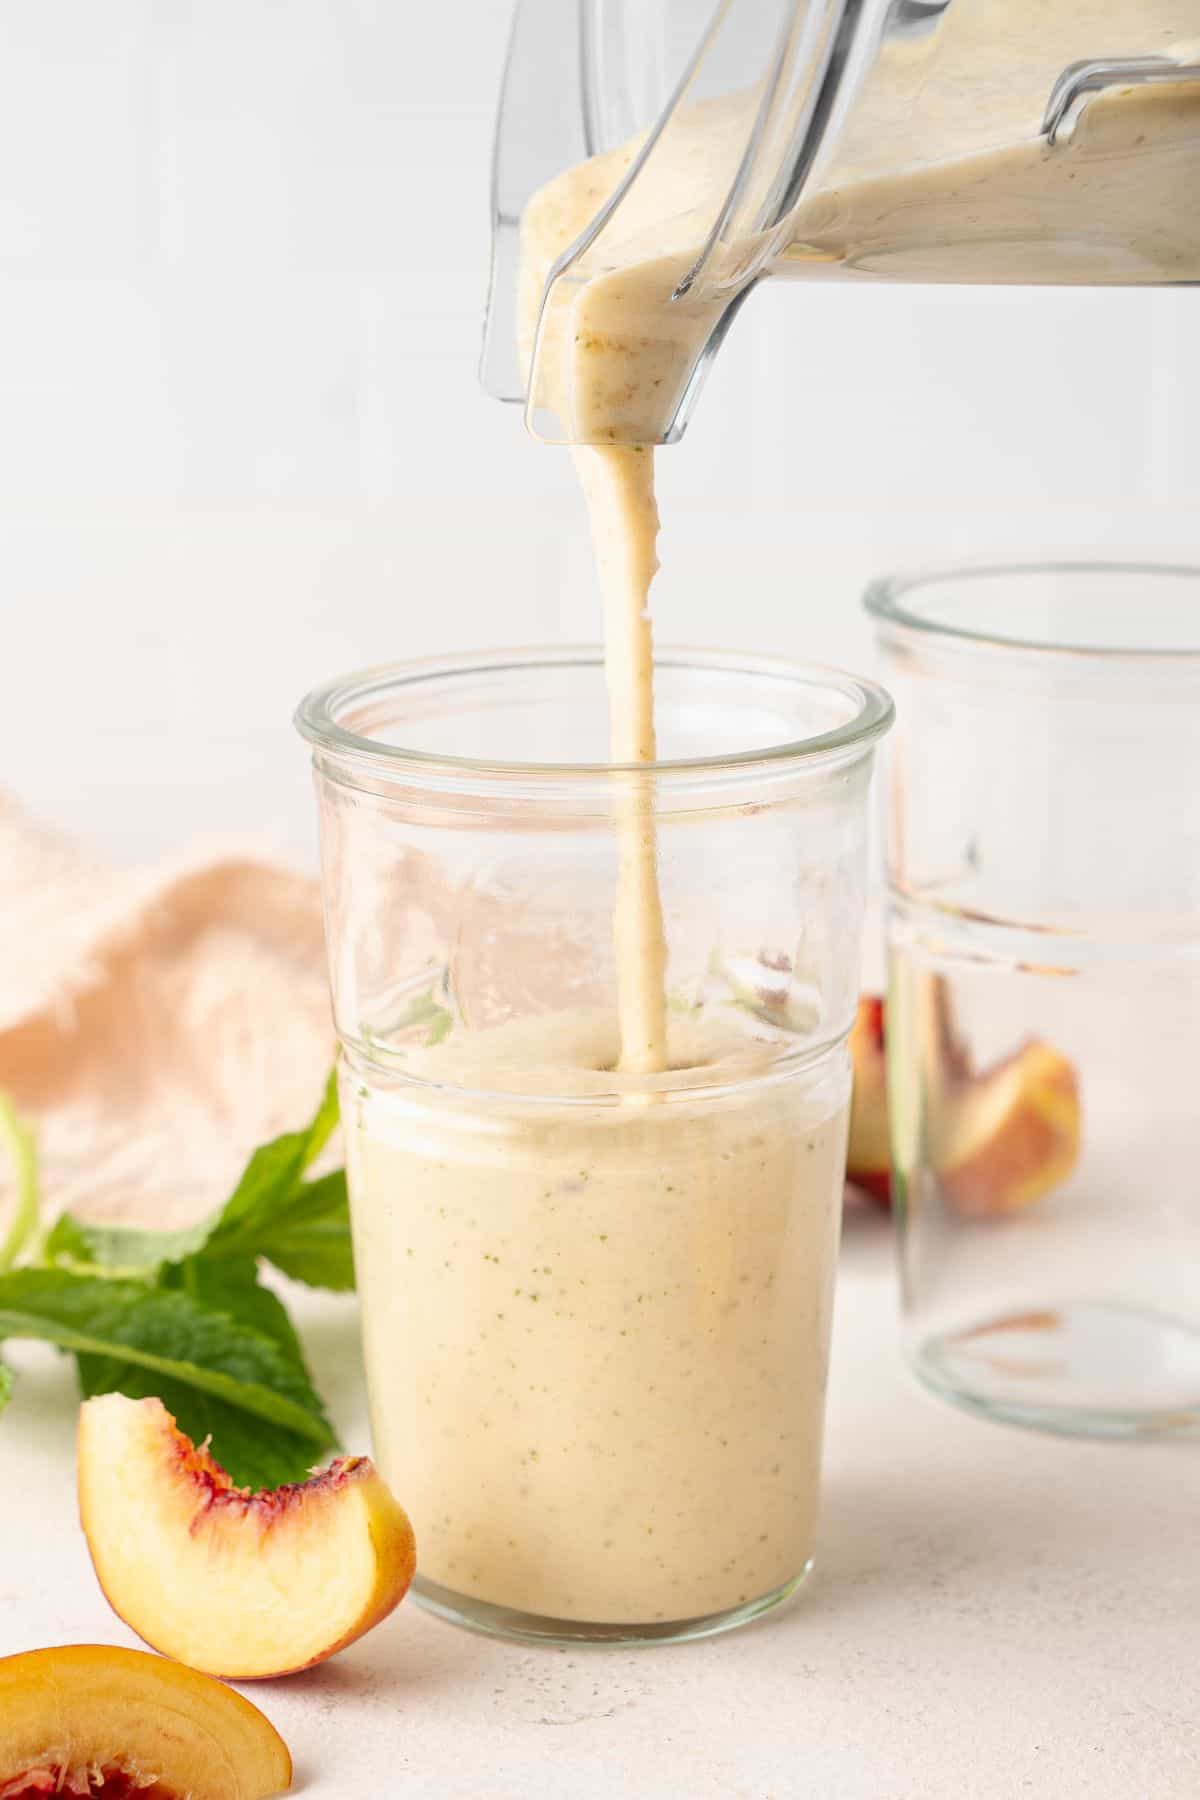 Peach and Banana Smoothie being poured into a glass from the blender.